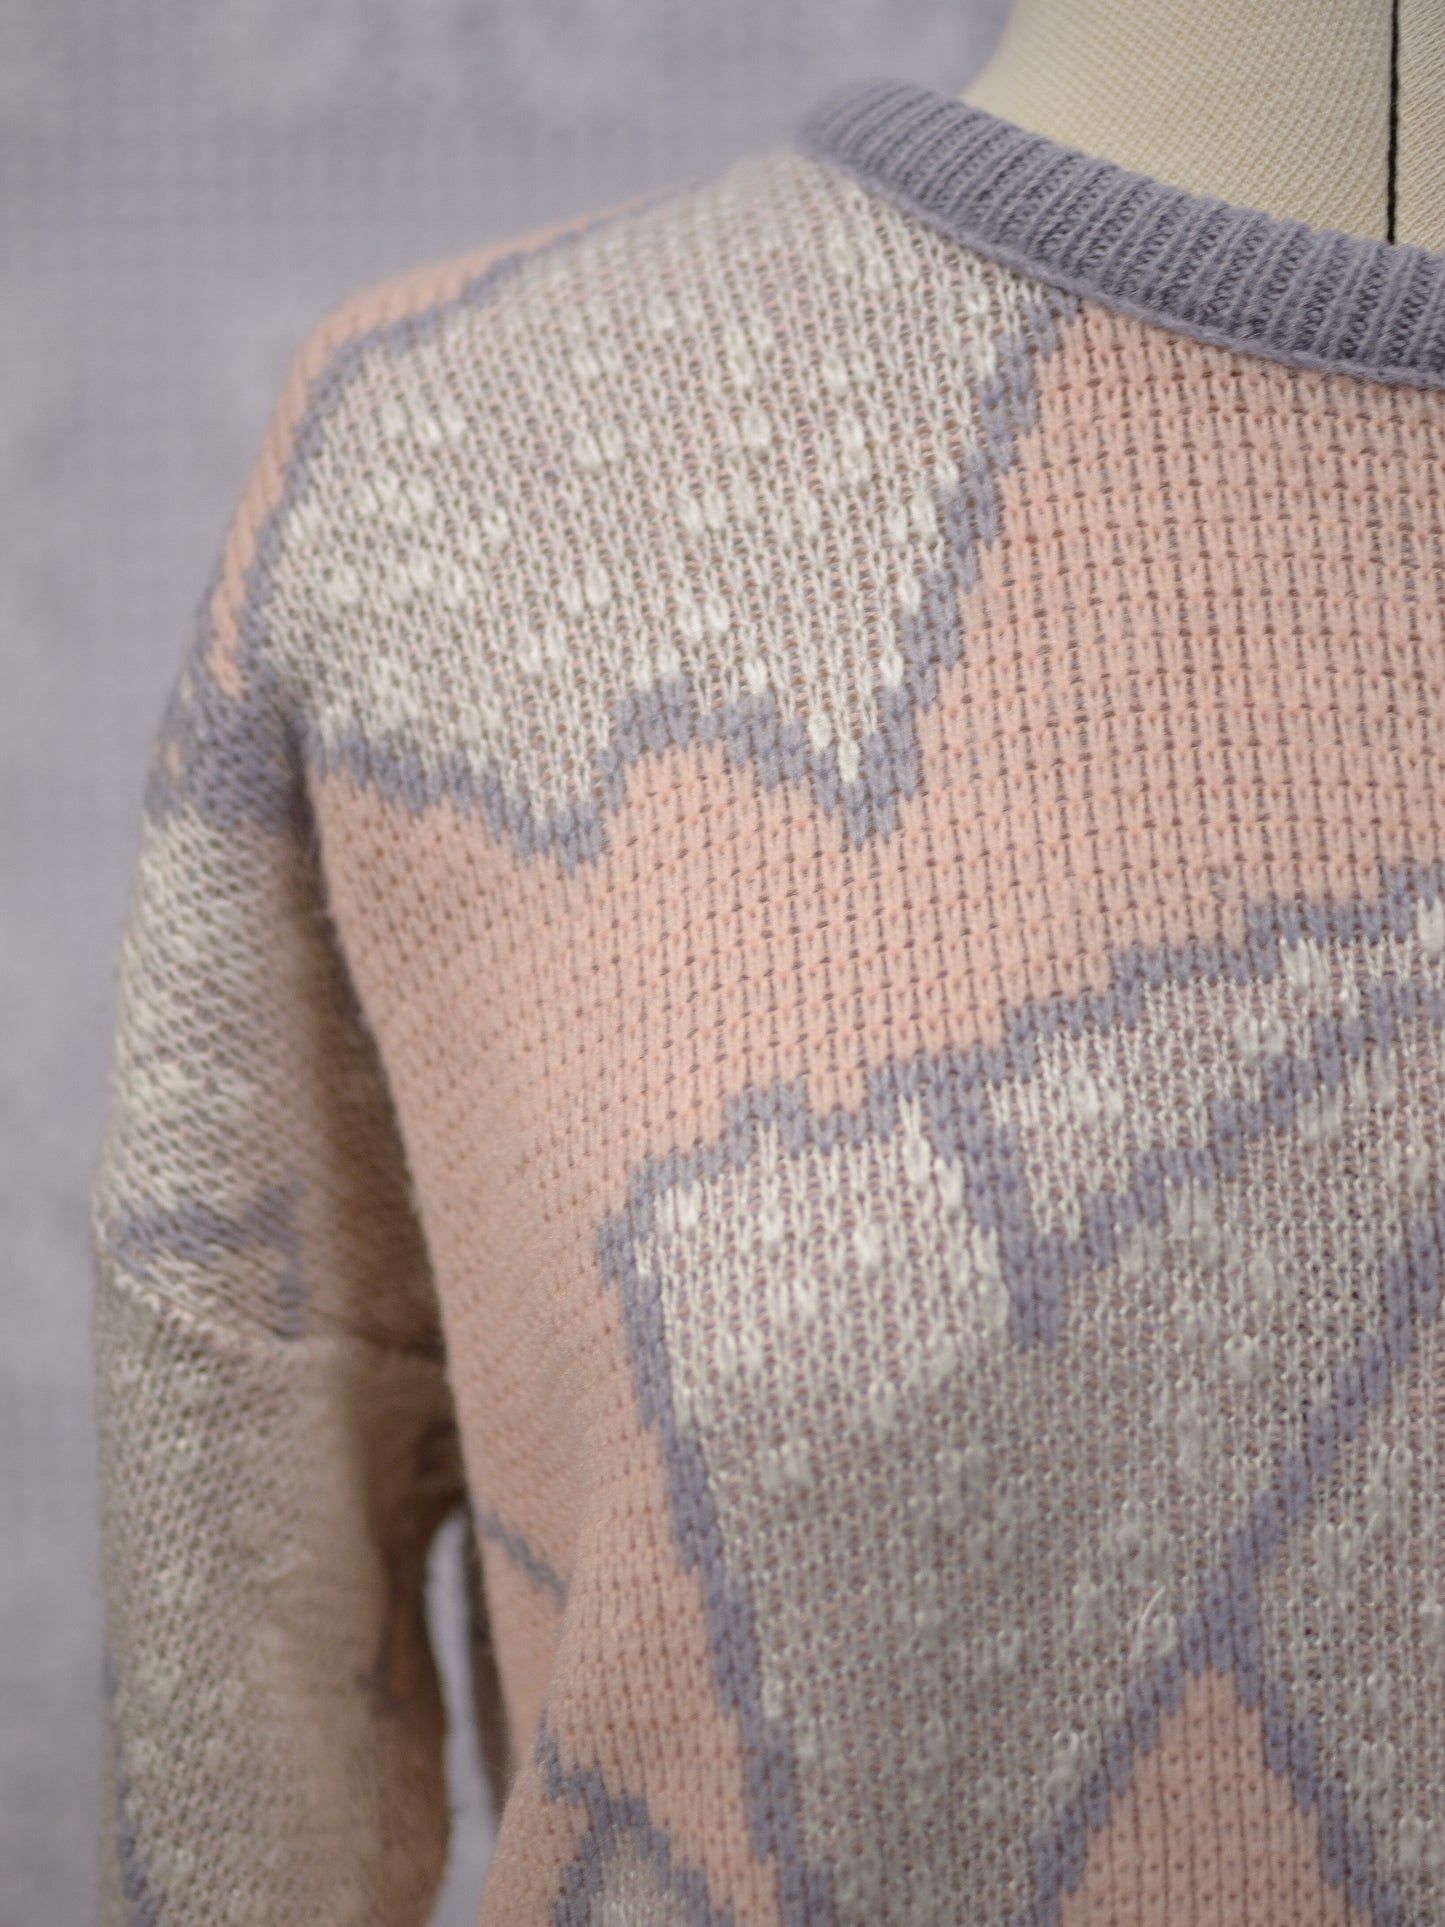 1980s pale pink and light blue abstract geometric pattern jumper